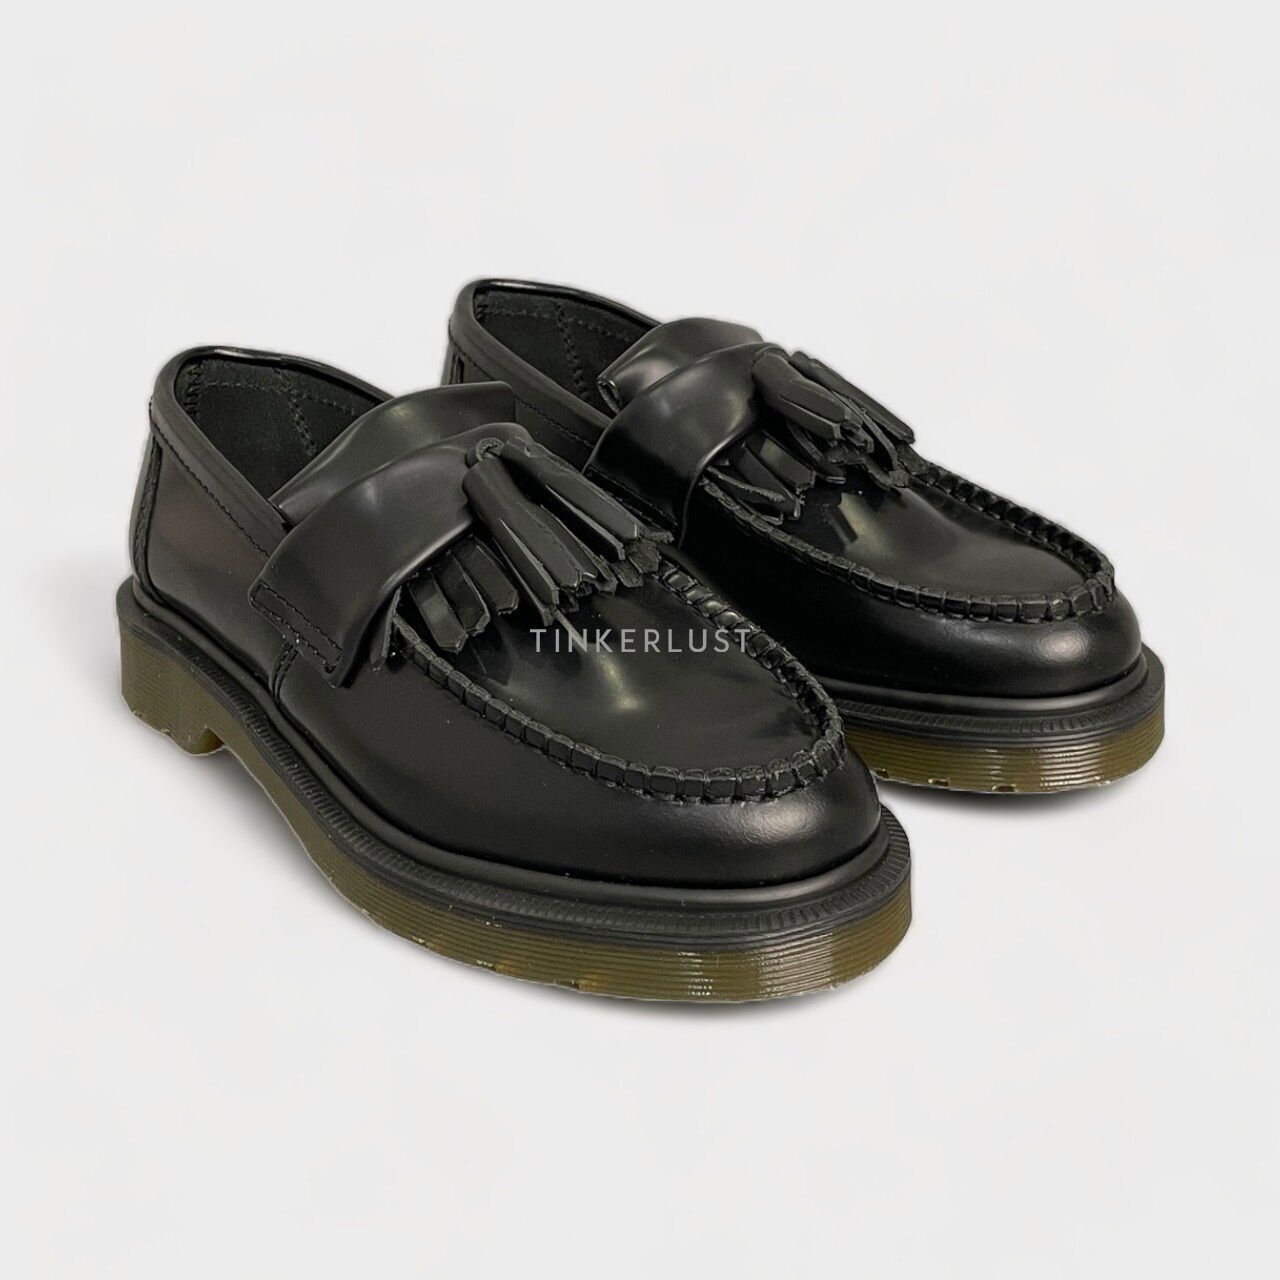 DRMARTENS Black Loafers